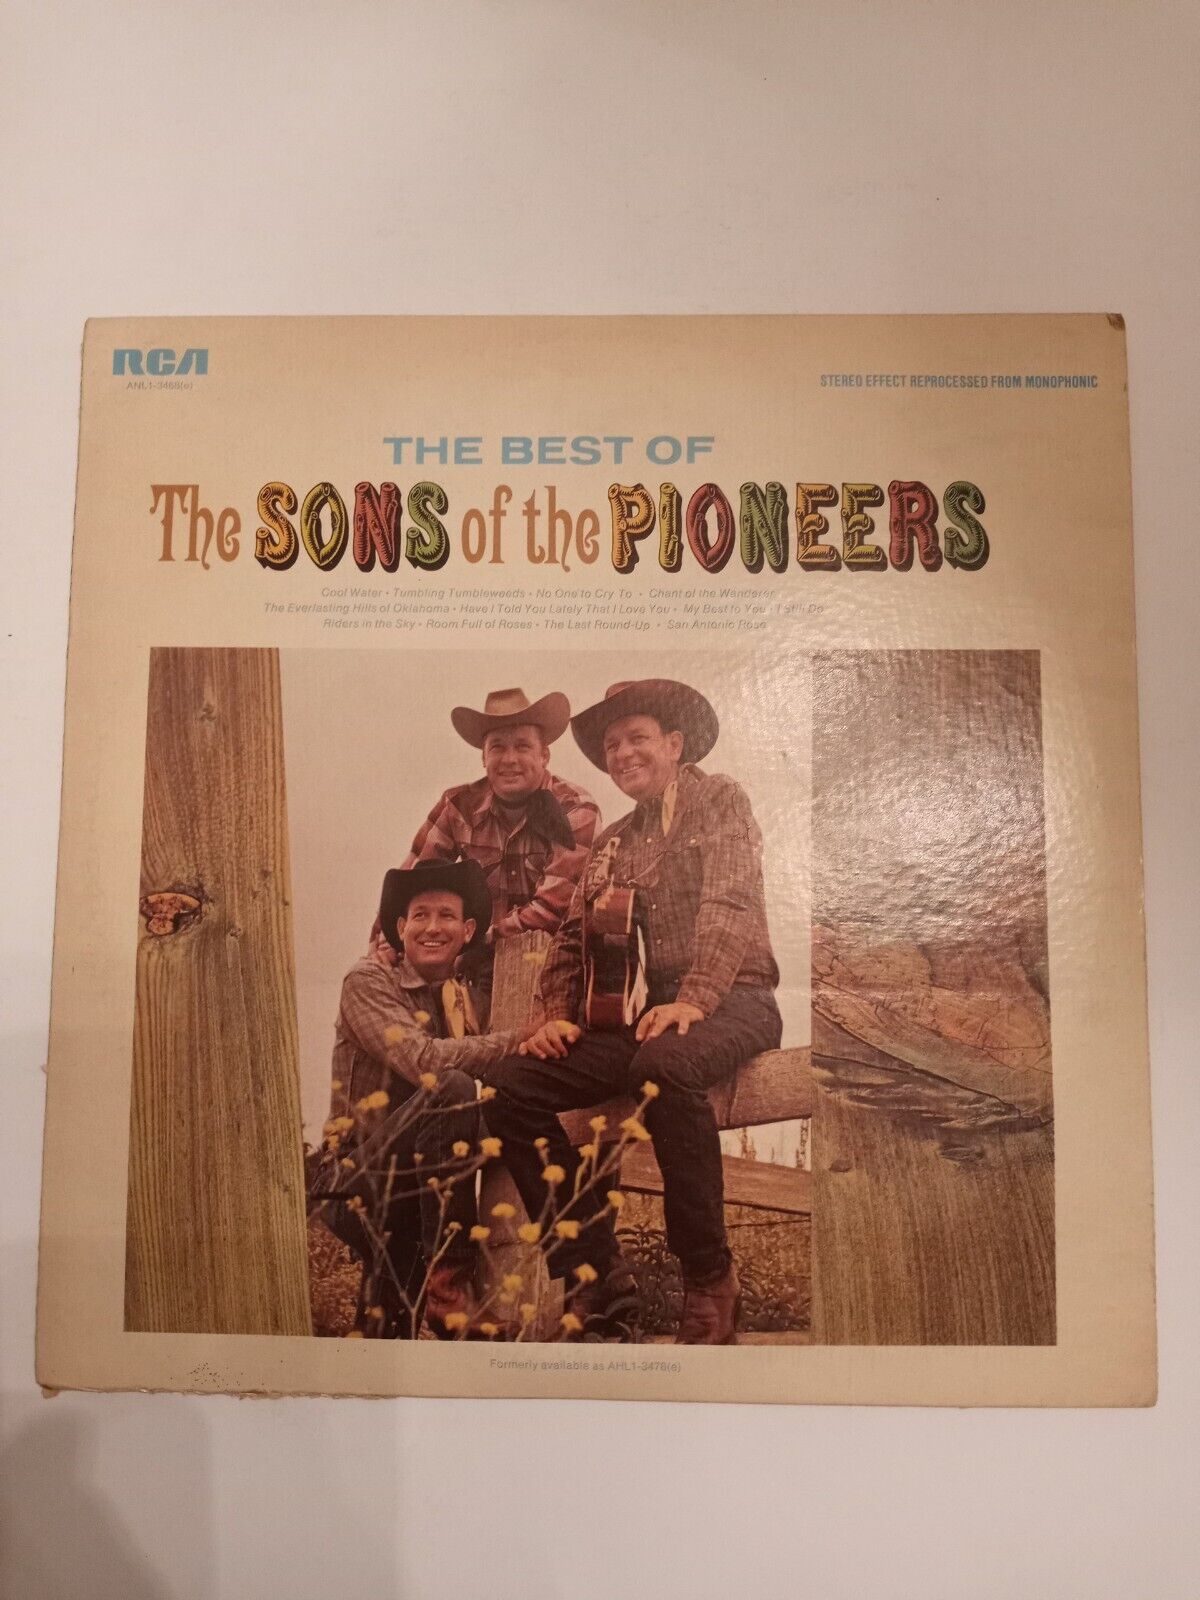 THE BEST OF THE SONS OF THE PIONEERS VINTAGE 1966  RCA Vinyl LP ANL1-3468e VG+  